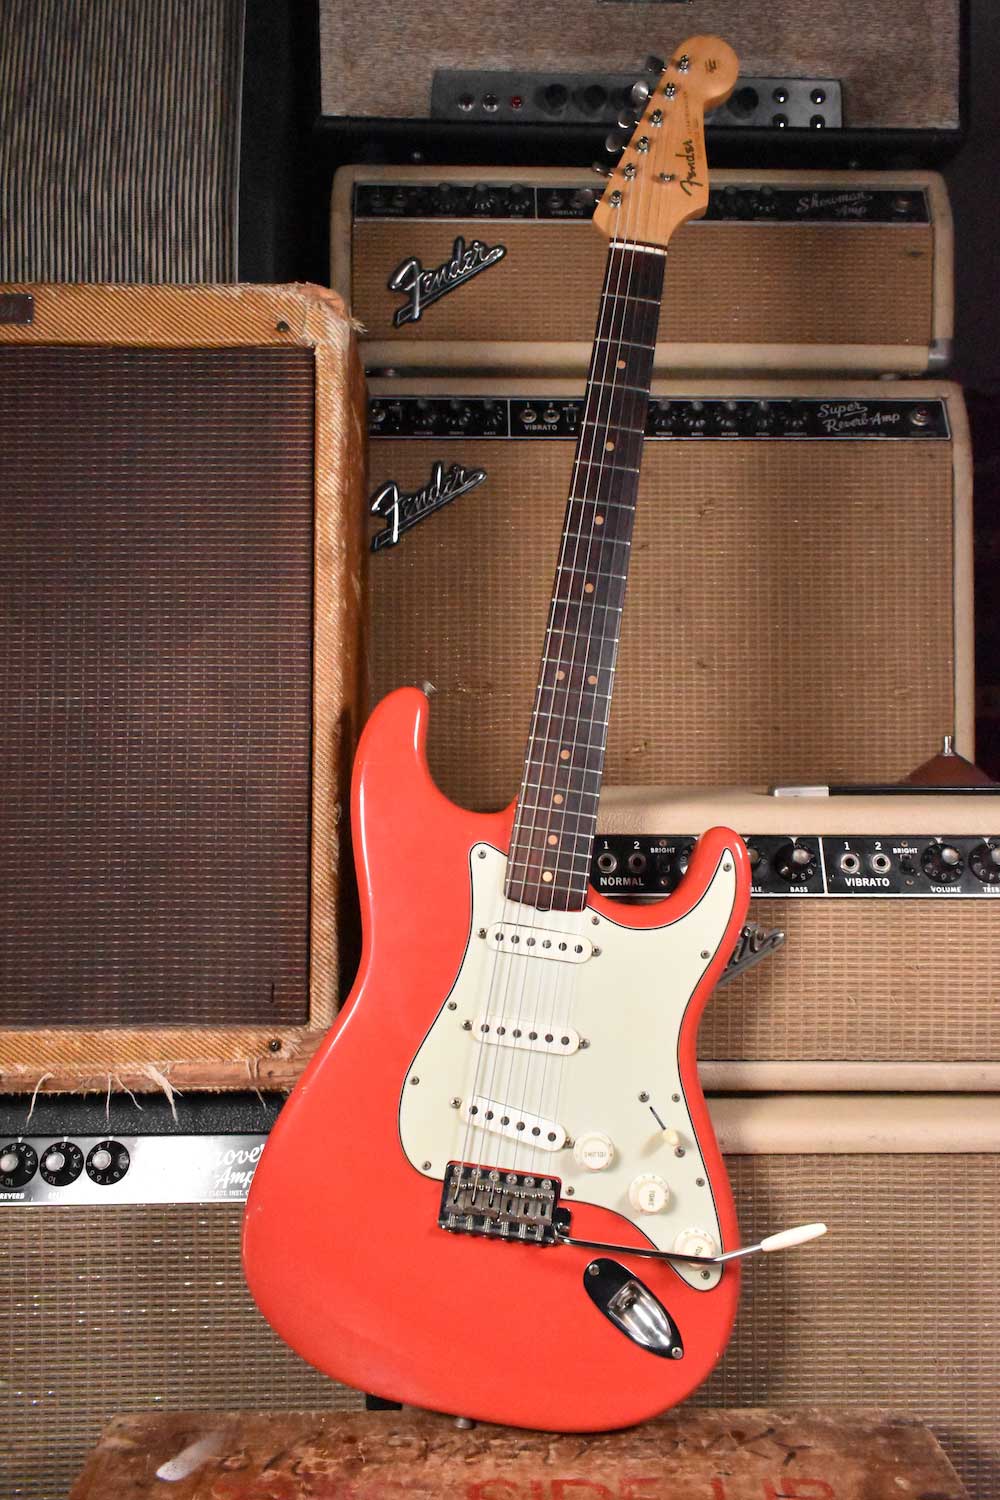 1963 Fender Stratocaster Fiesta Red over Coral - Serial: L11949